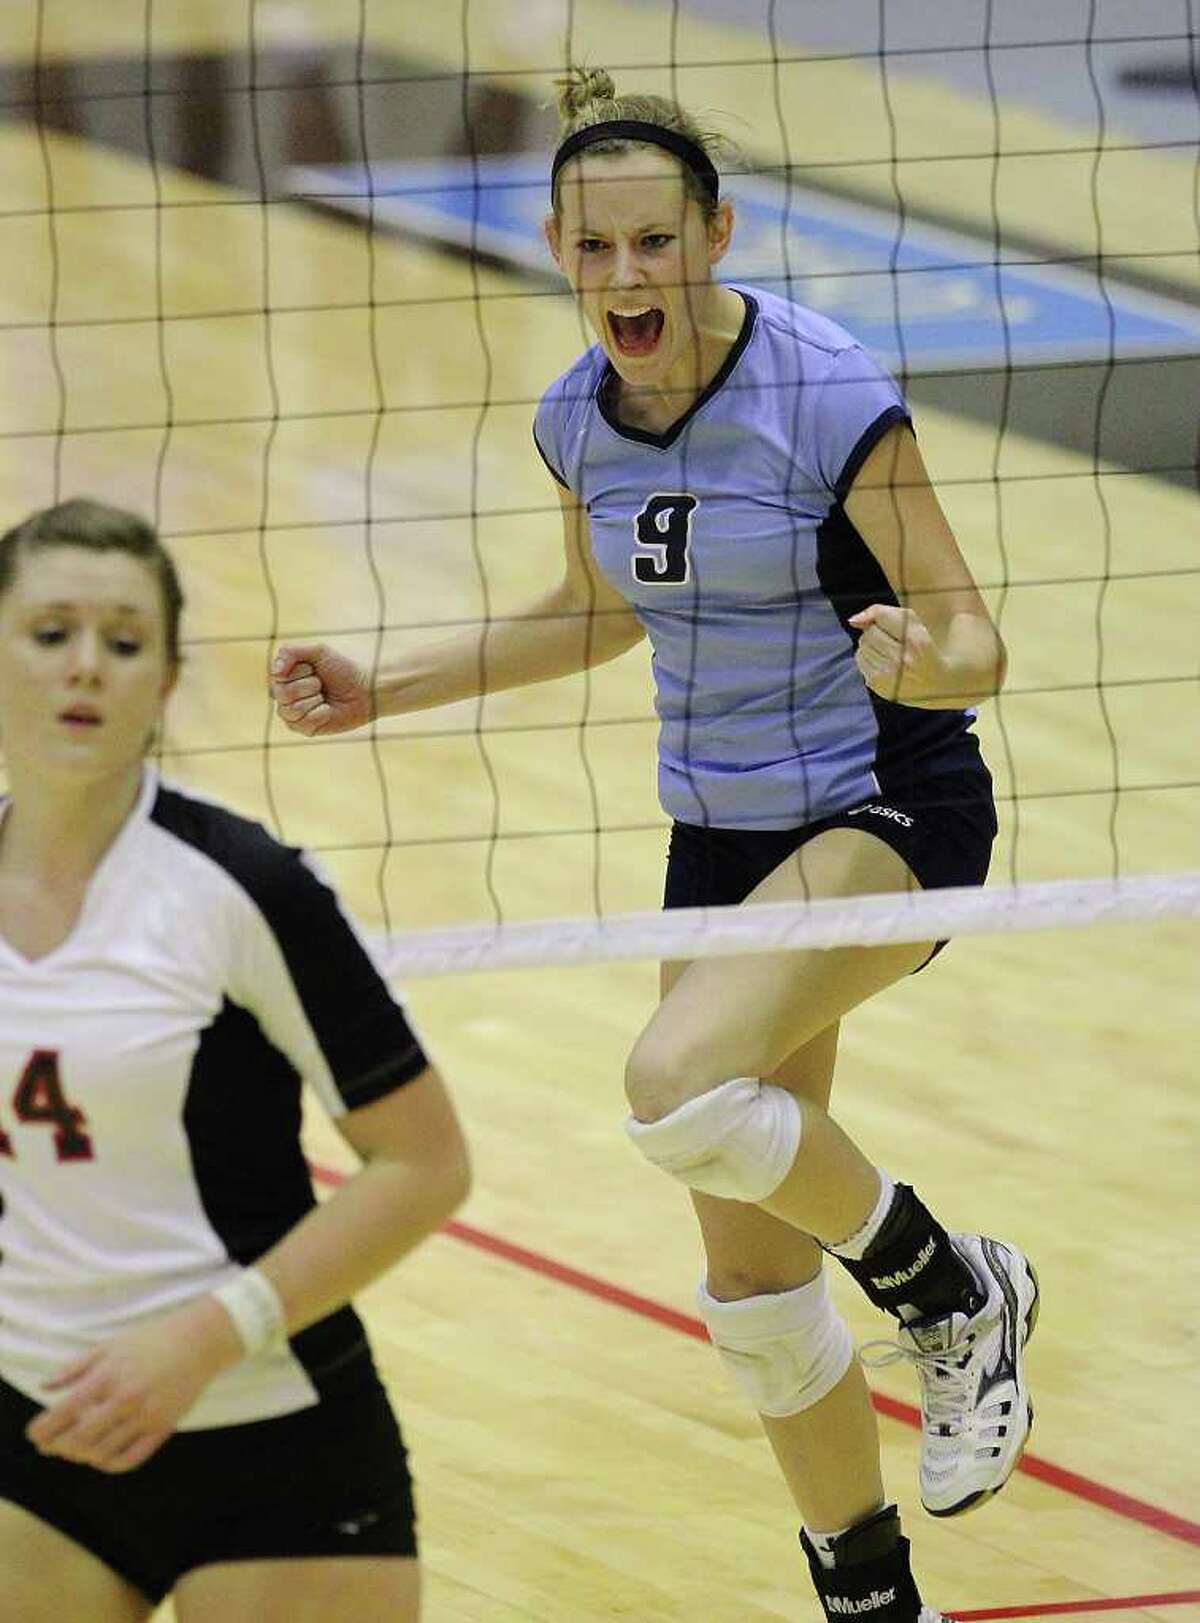 Johnson's Kassie Freitag (09) reacts after winning a point against Churchill's Audrey Sanders (14) in volleyball at Littleton Gym on Tuesday, Oct. 18, 2011. Johnson defeated Churchill in three straight games. Kin Man Hui/kmhui@express-news.net